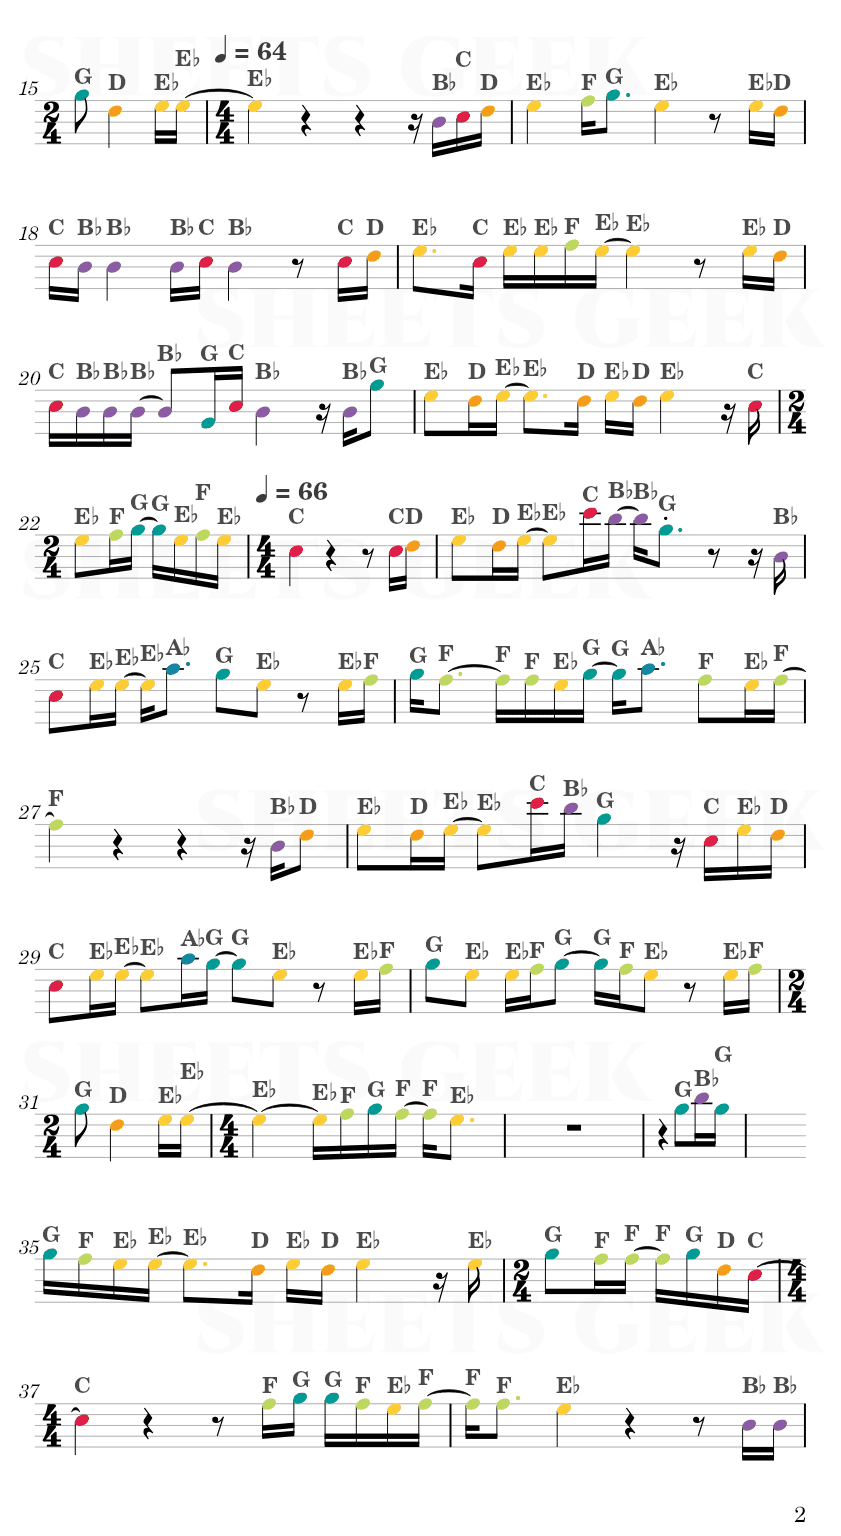 Rainbow - Kacey Musgraves Easy Sheet Music Free for piano, keyboard, flute, violin, sax, cello page 2